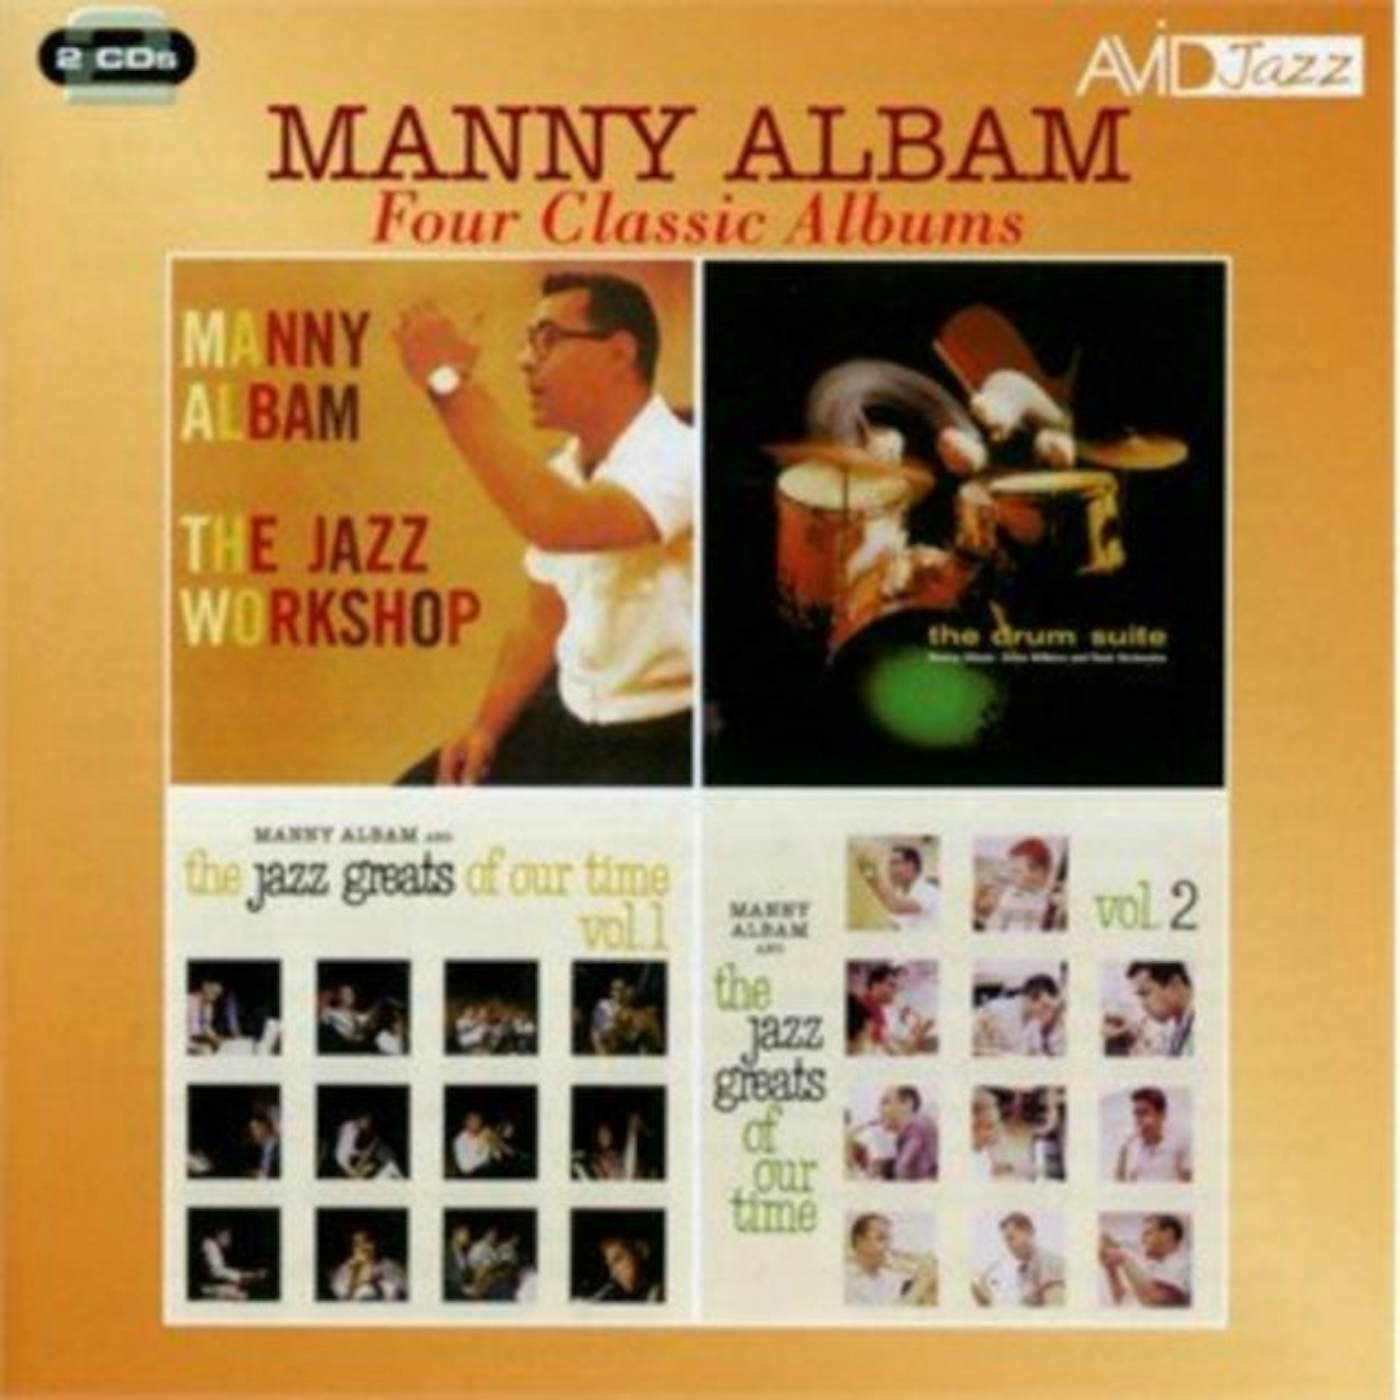 Manny Albam CD - Four Classic Albums (Jazz Workshop / The Drum Suite / The Jazz Greats Of Our Time Vol 1 / The Jazz Greats Of Our Time Vol 2)